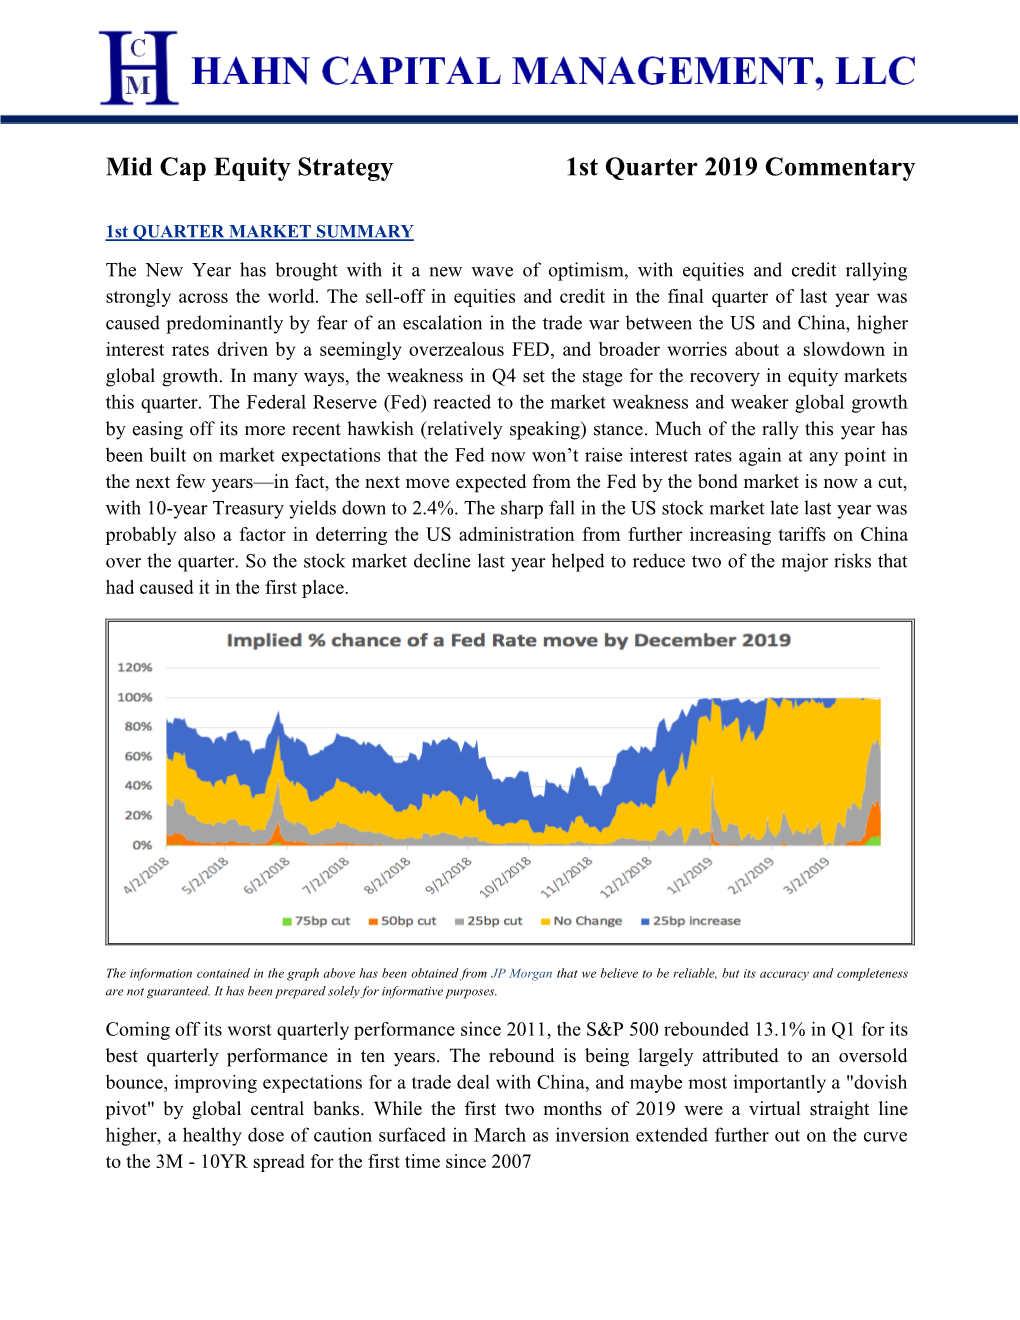 Mid Cap Equity Strategy 1St Quarter 2019 Commentary